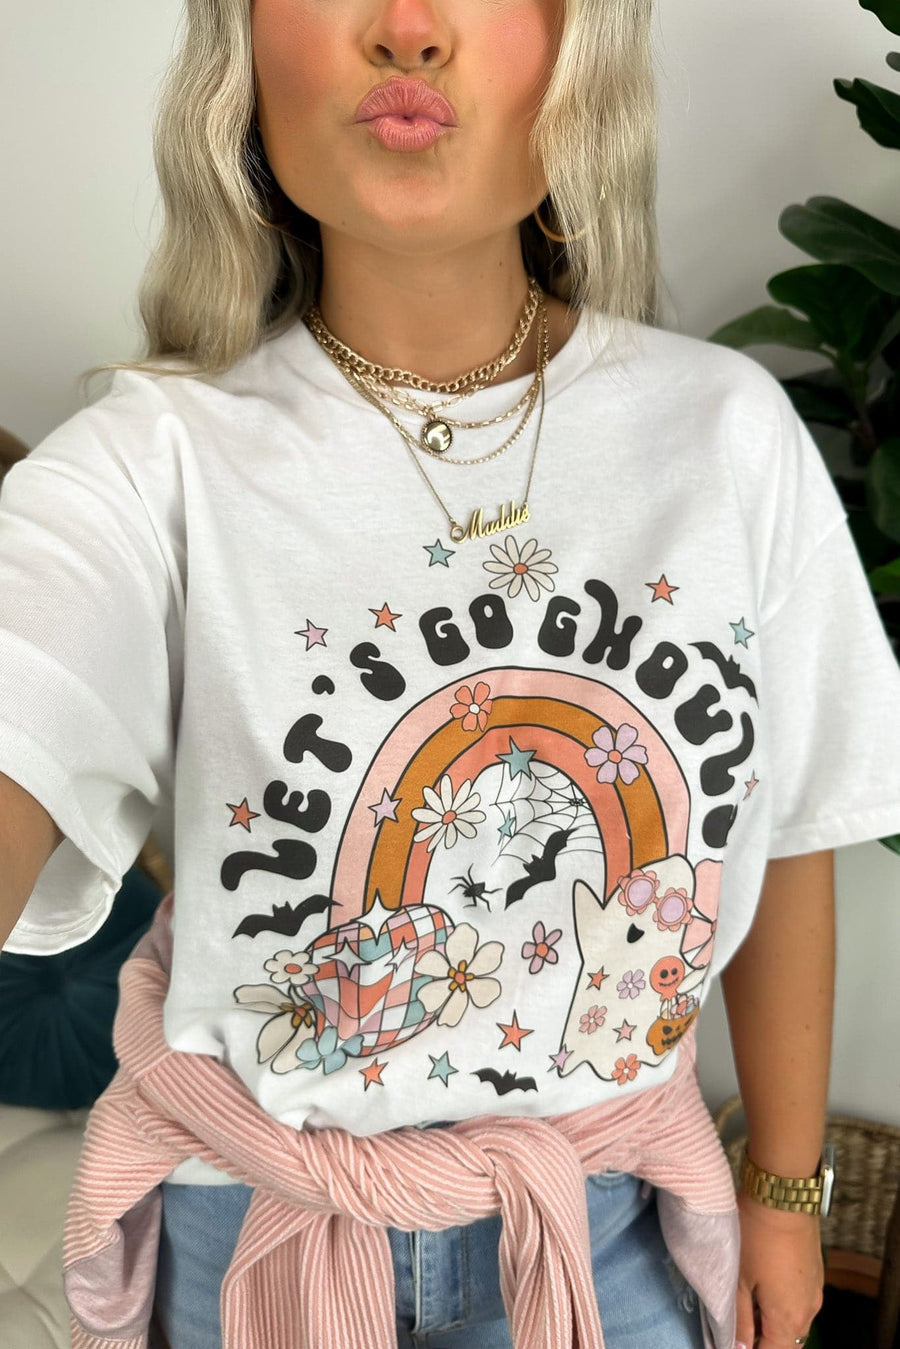  Let's Go Ghouls Graphic Tee - FINAL SALE - Madison and Mallory